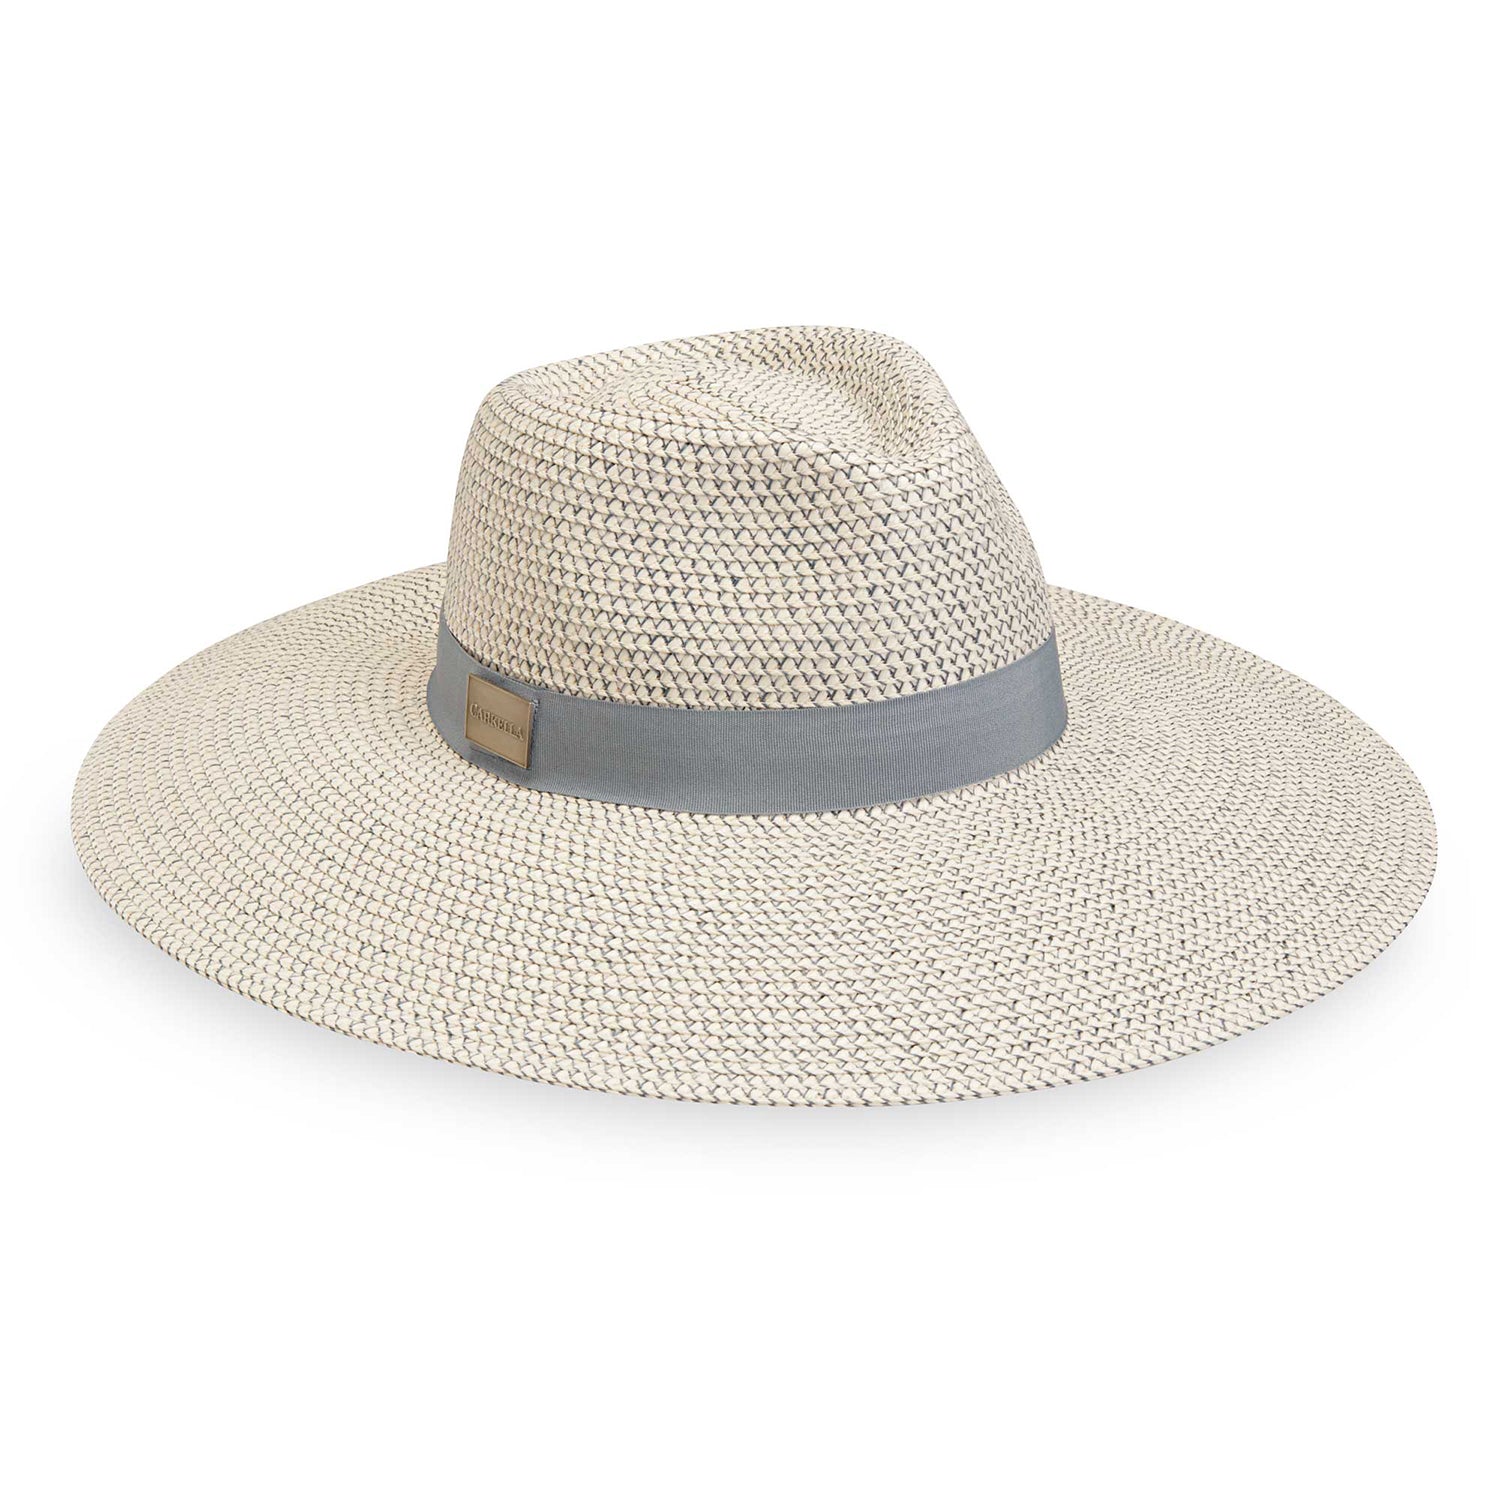 Featuring Kerrigan sun hat by Carkella that features a big wide brim,  and is travel friendly